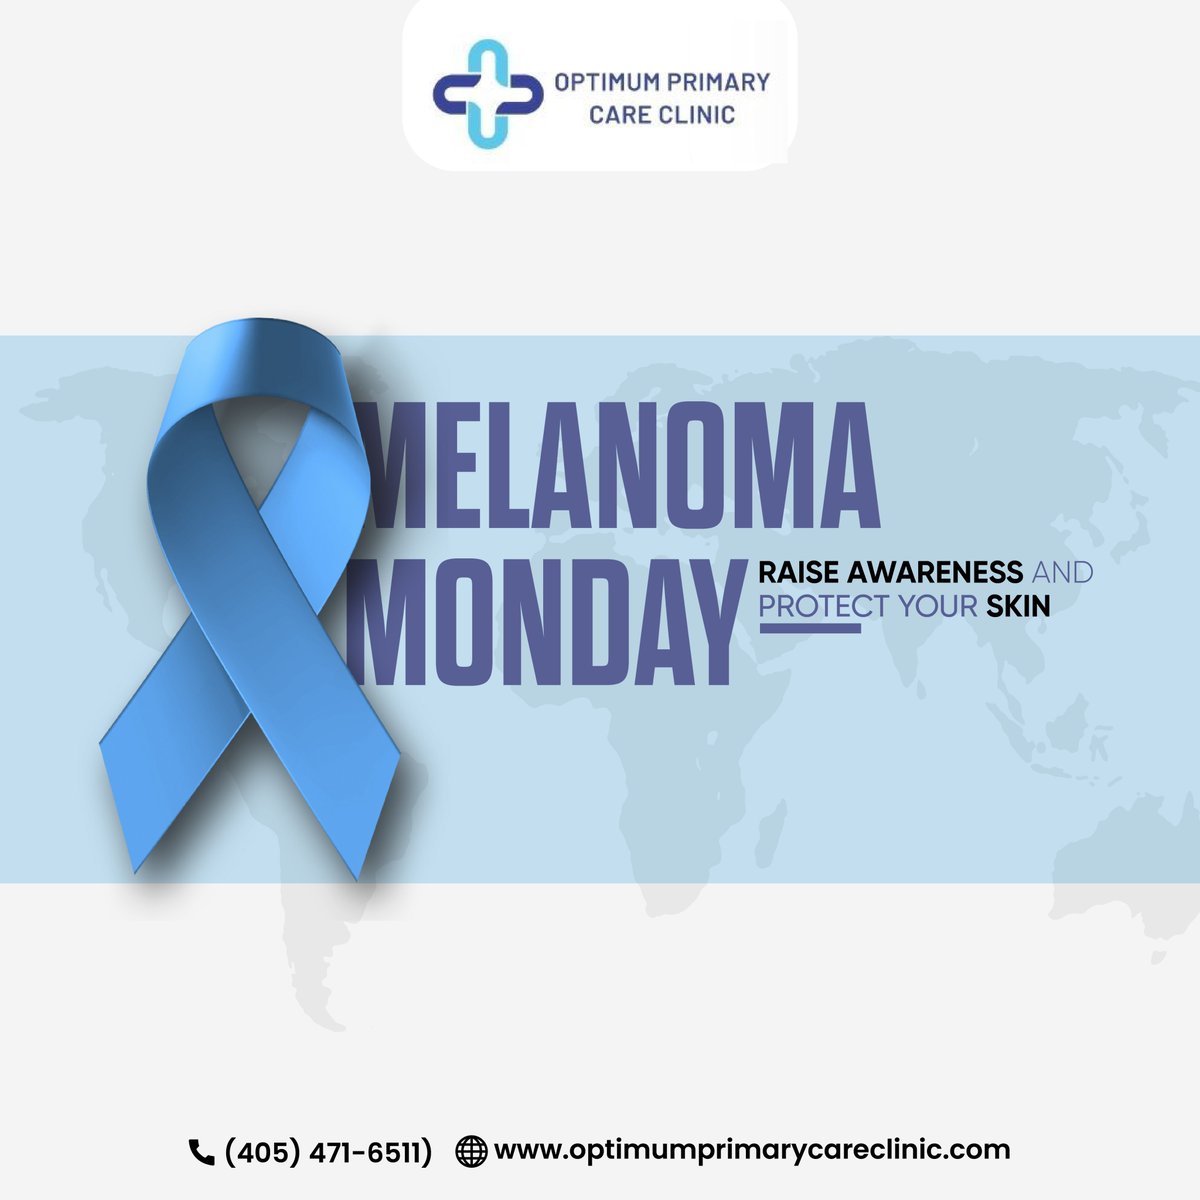 Come along with us At Optimum Primary Care in our efforts to endorse Melanoma Monday.✨🎗
We emphasize the importance of sun safety and increase awareness about maintaining healthy skin. 
#MelanomaMonday #HealthySkin #SkinCancerPrevention #OptimumPrimaryCare